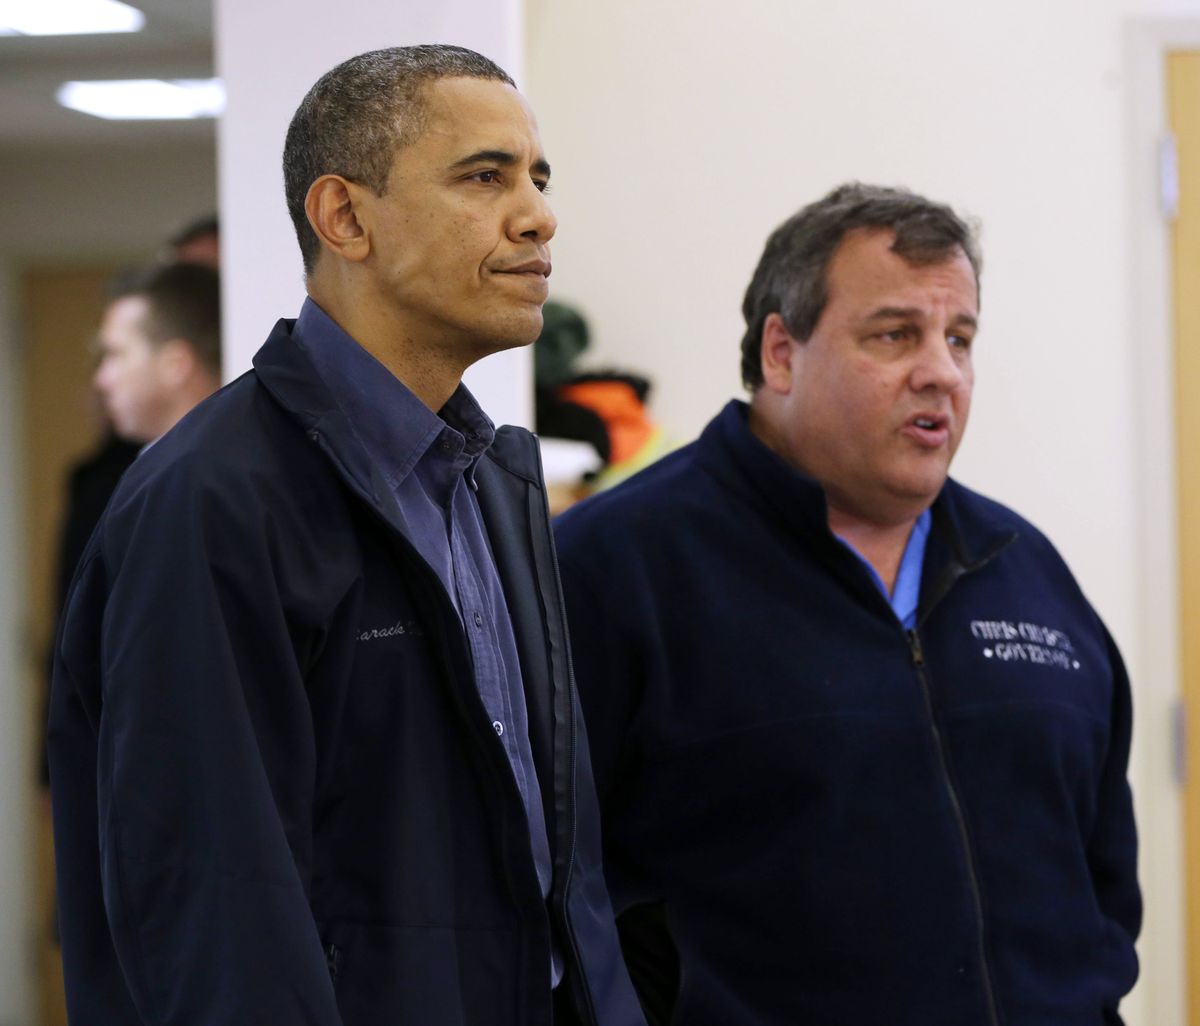 President Barack Obama and New Jersey Gov. Chris Christie visit the Brigantine Beach Community Center to meet with local residents, Wednesday, Oct. 31, 2012,  in Brigantine, NJ. Obama traveled to Atlantic Coast to see first-hand the relief efforts after Superstorm Sandy damage the Atlantic Coast. (Pablo Monsivais / Associated Press)